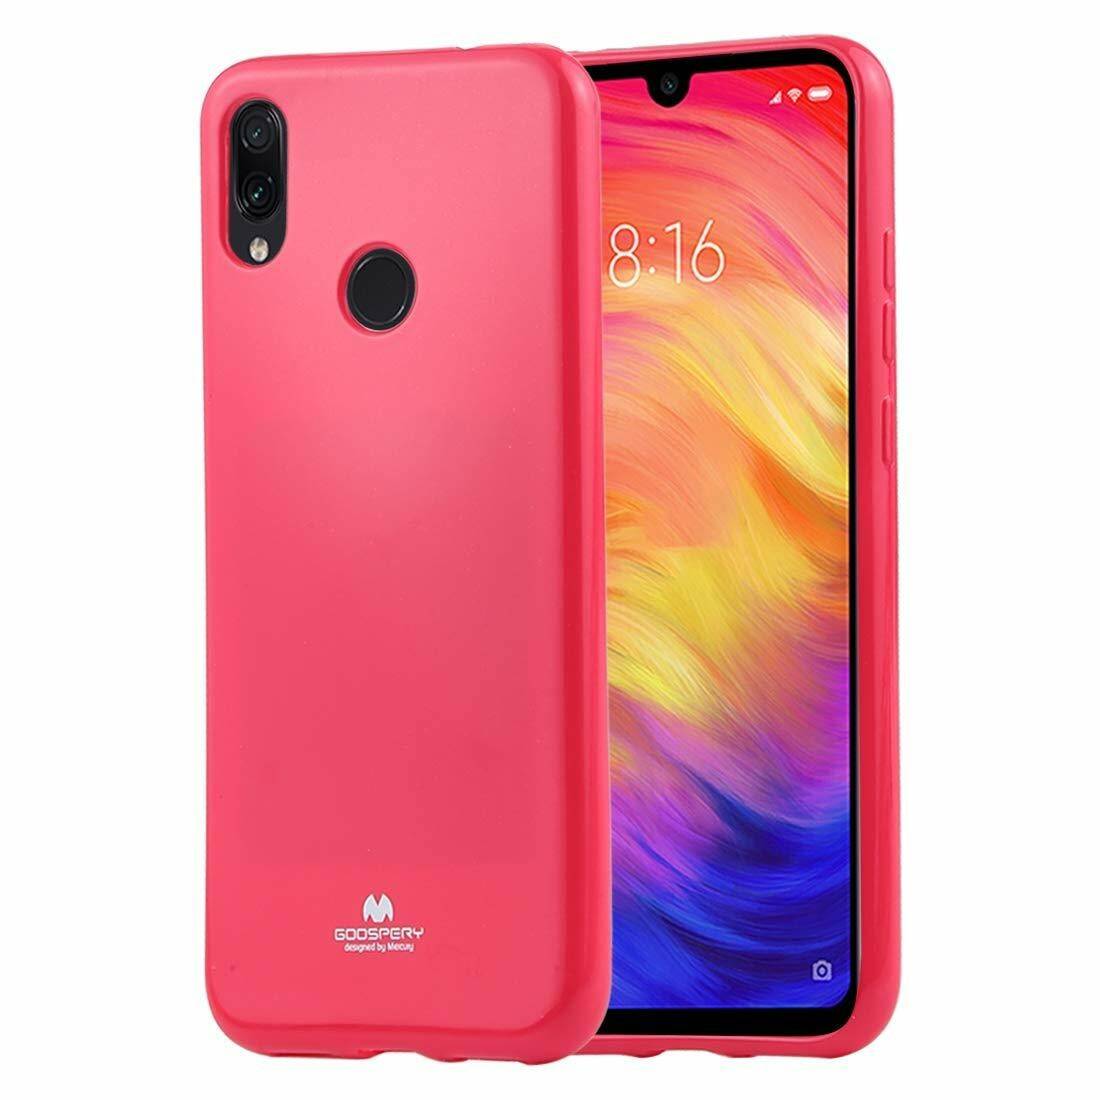 JELLY CASE HUAWEI P10 LITE HOTPINK